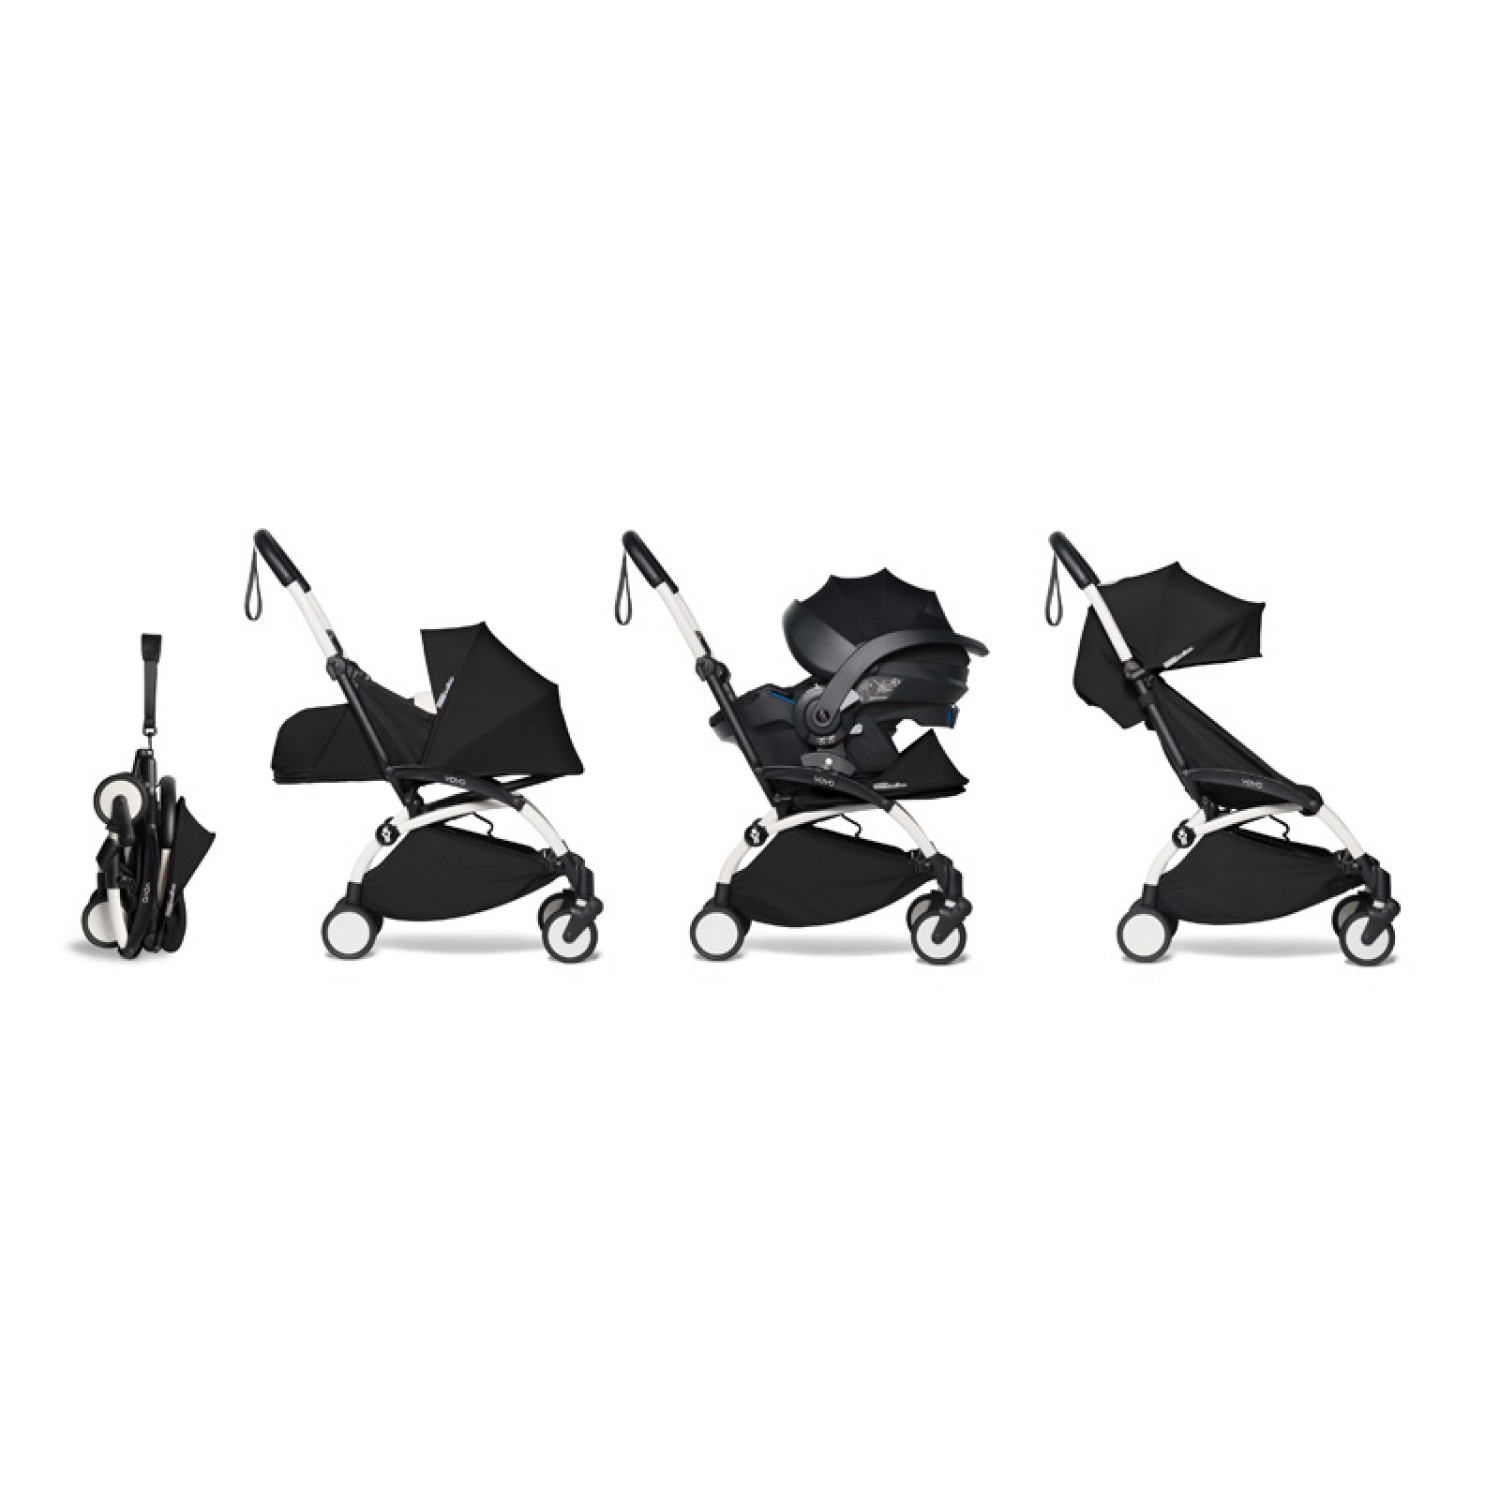 All-in-one BABYZEN stroller YOYO2 0+, car seat and 6+   | White Chassis Black